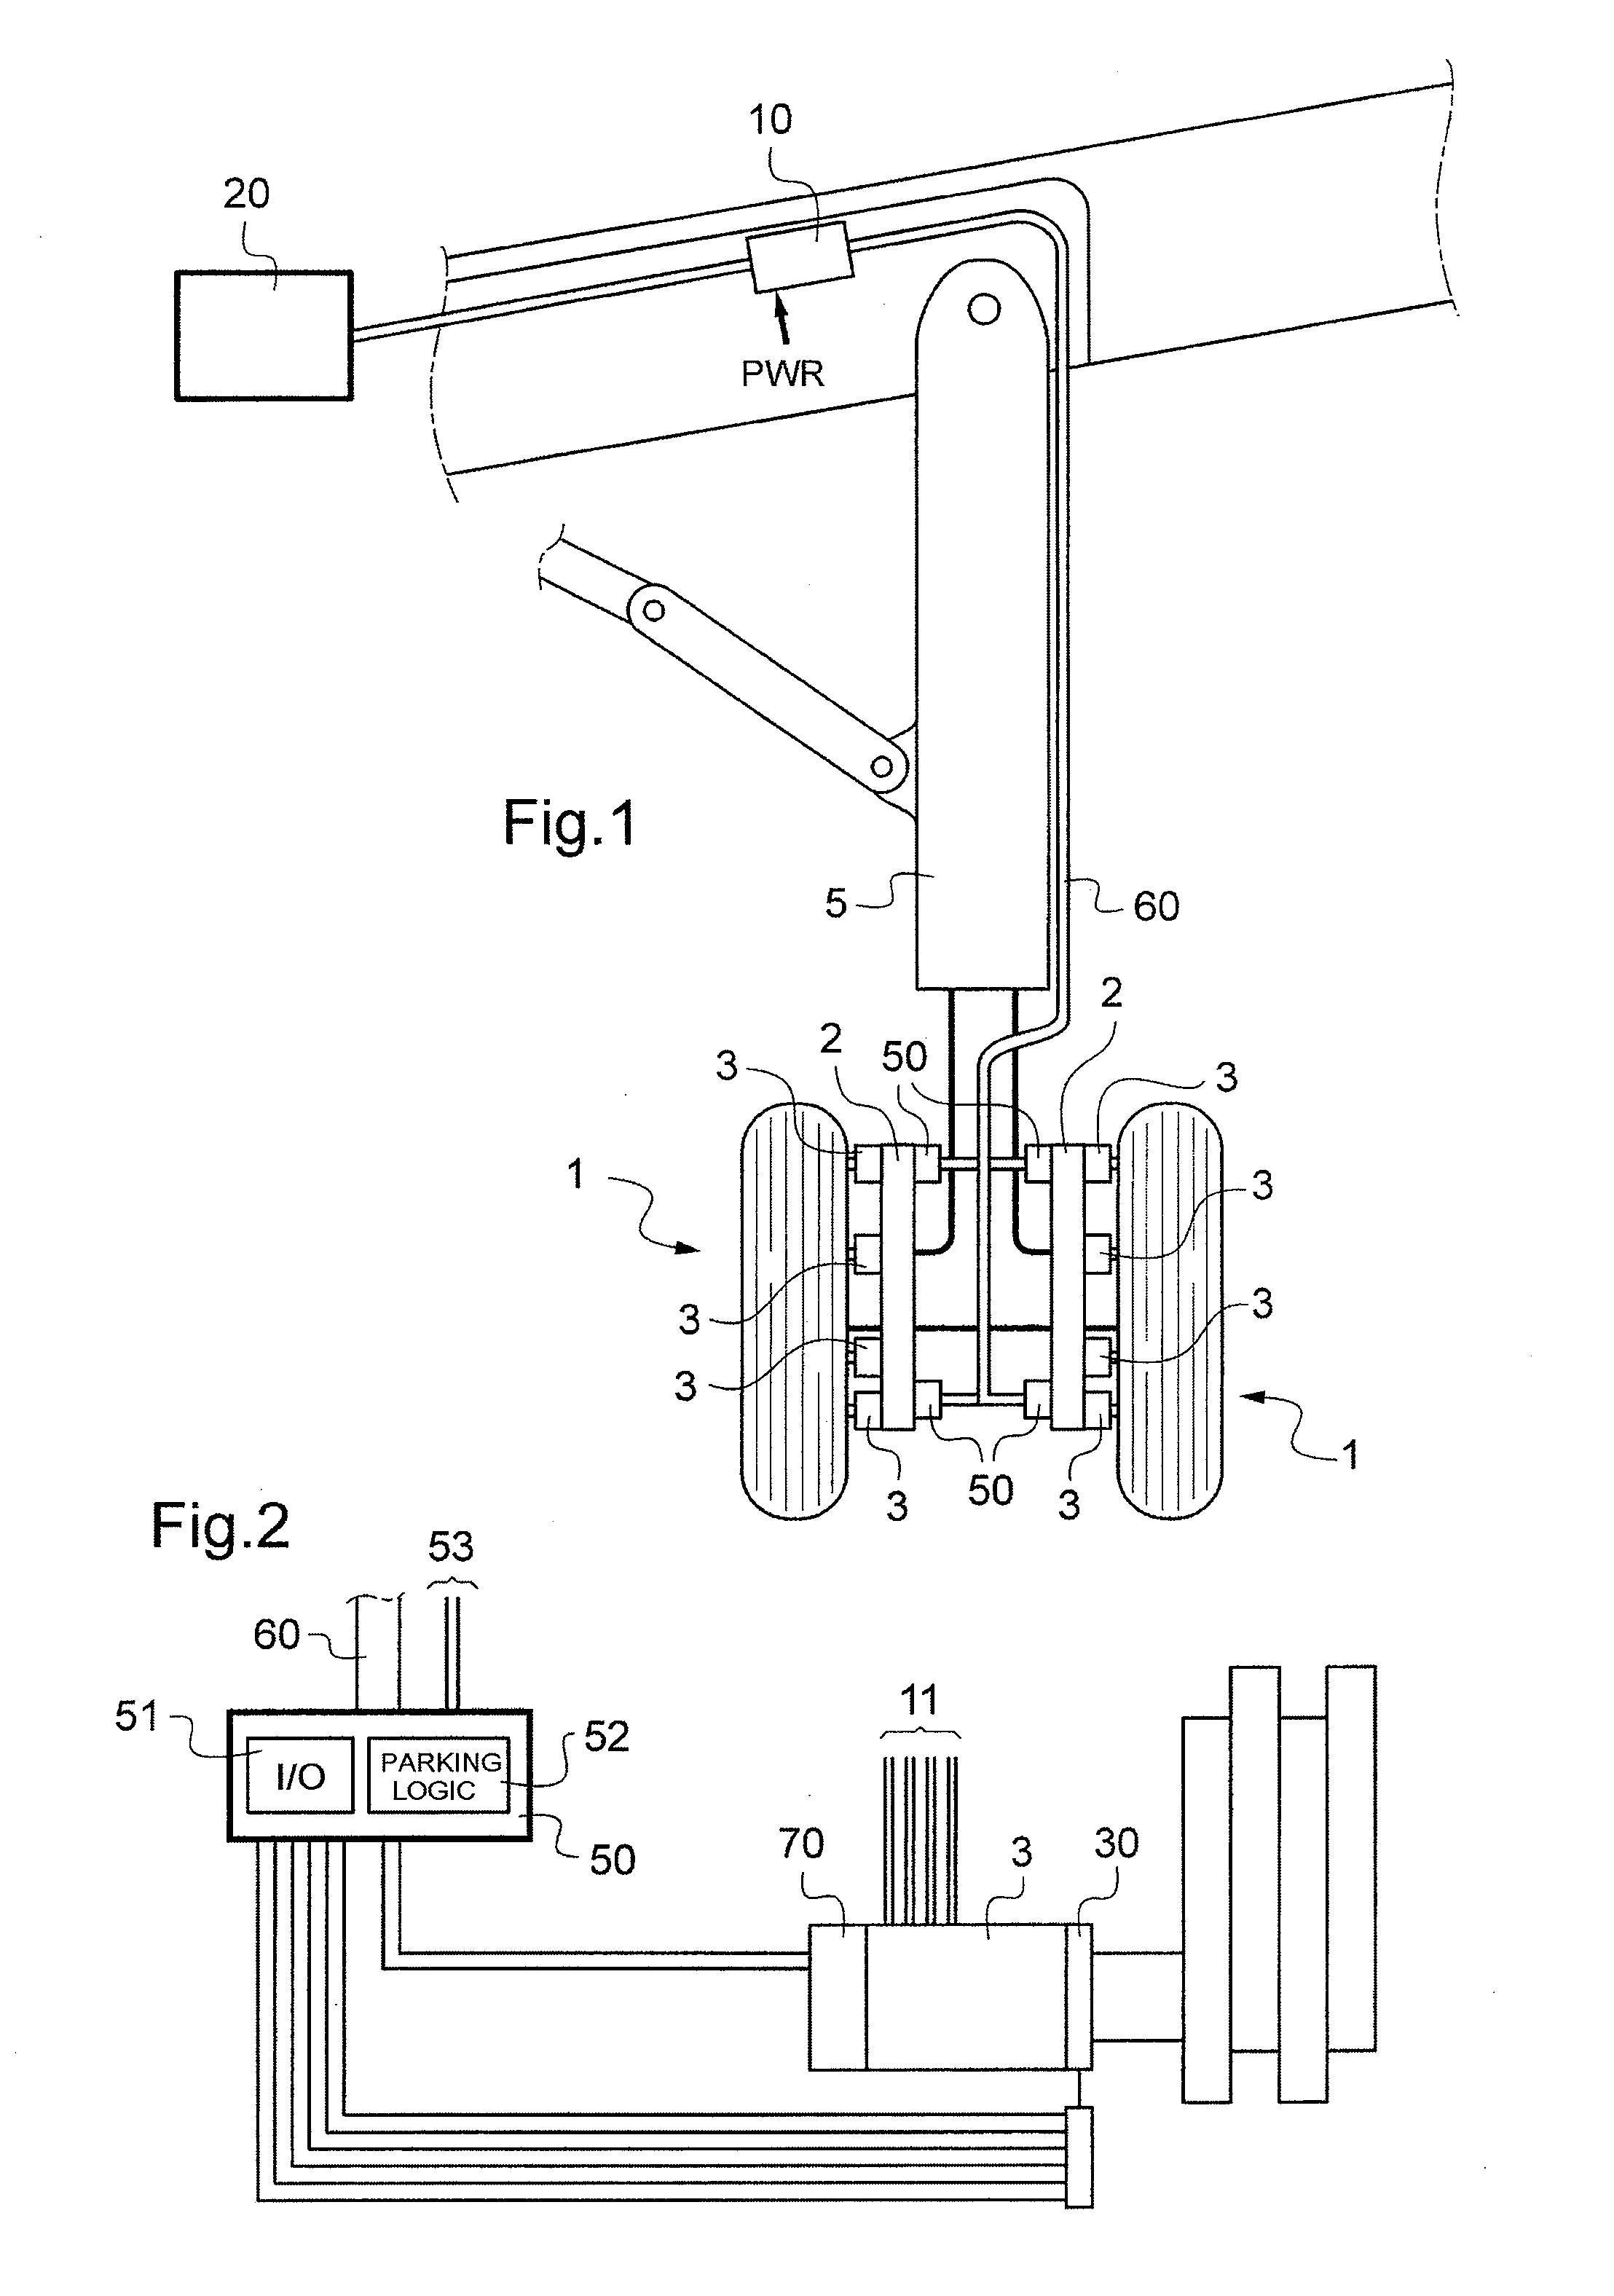 Braking system architecture for an aircraft fitted with electromechanical brakes